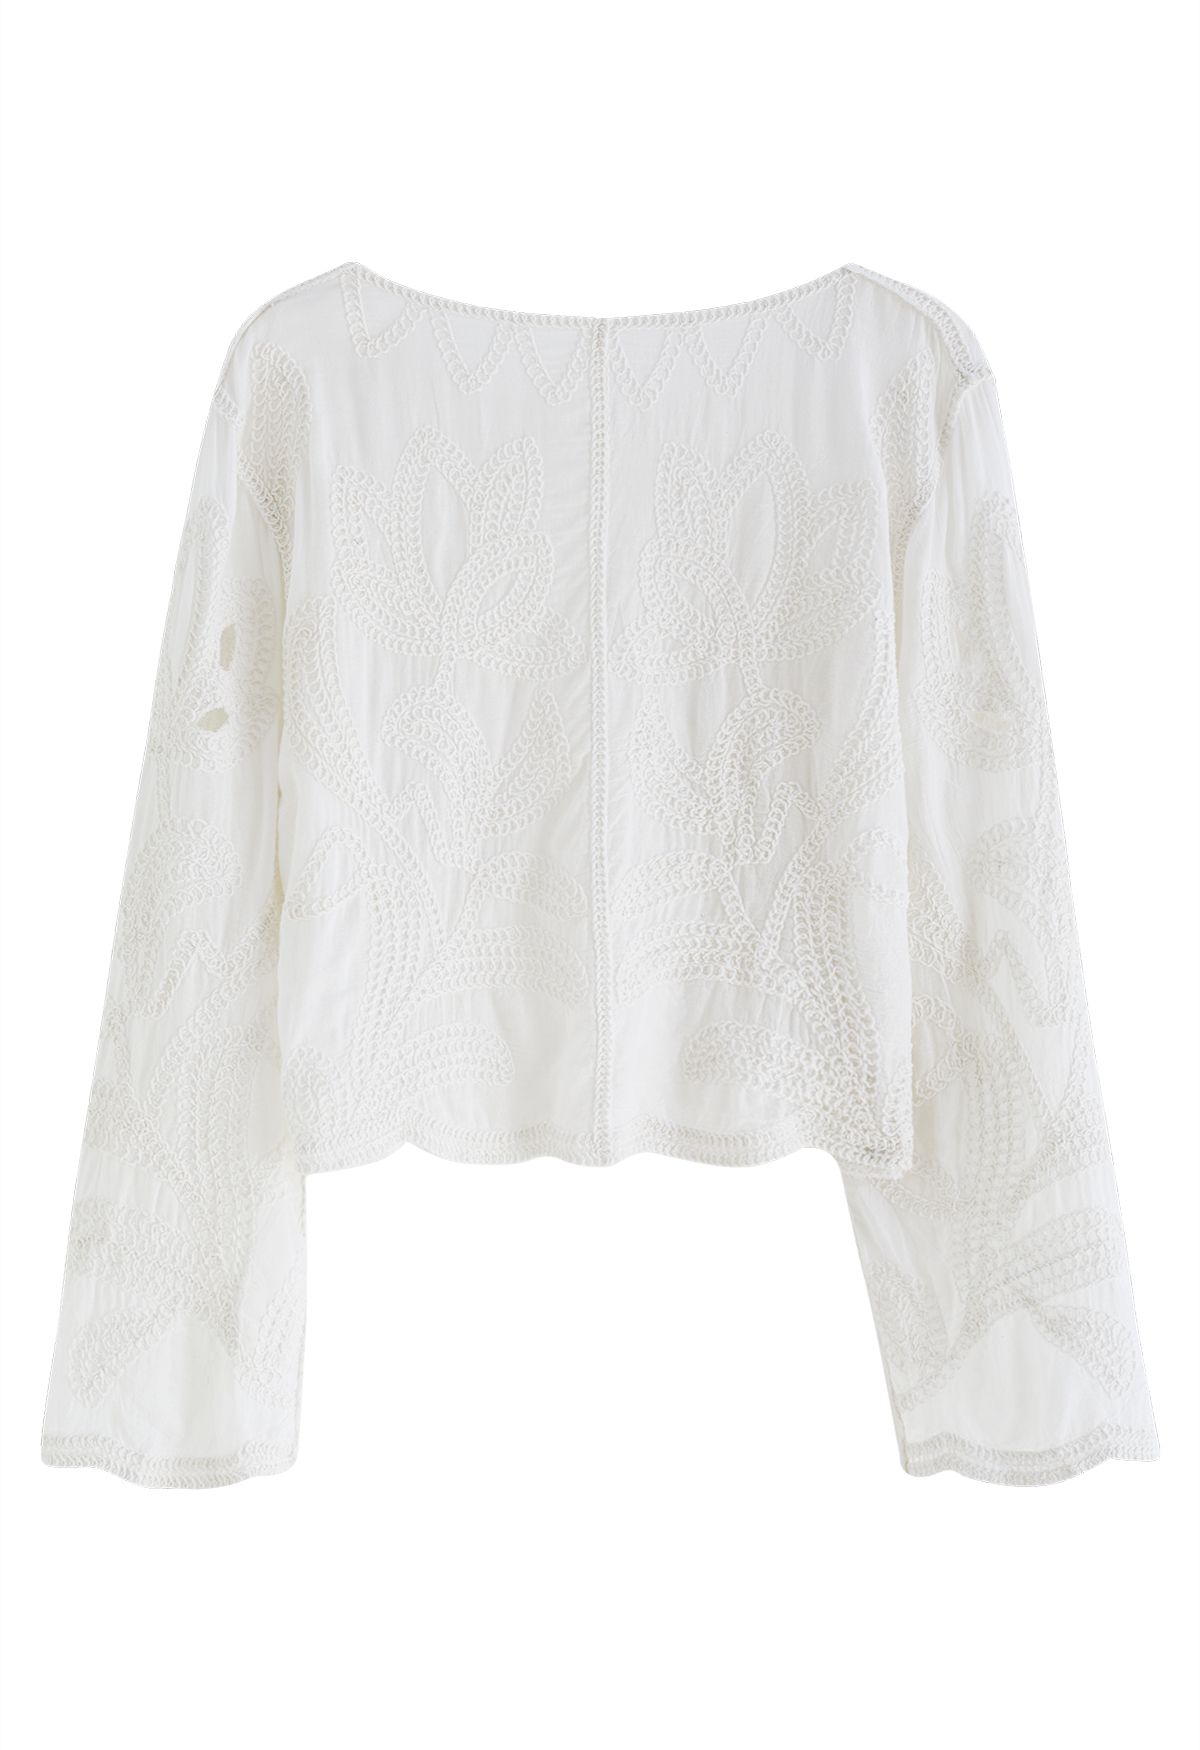 Cutwork Trim Grass Embroidered Top in White